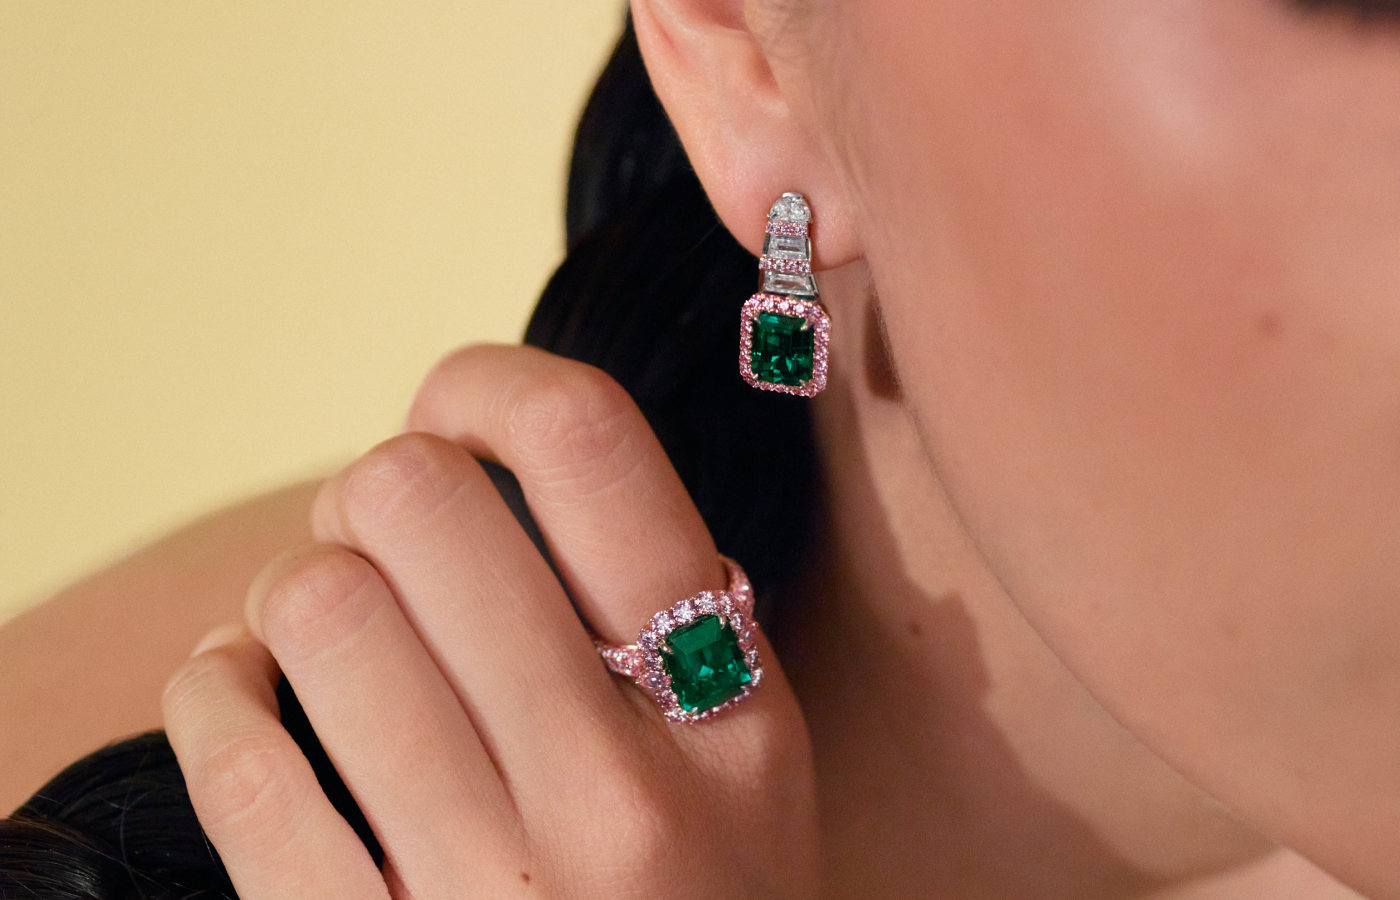 Model wearing Muzo Emerald Colombia Catalina earrings and Diana ring in gold, platinum, Muzo Emeralds, Argyle pink diamonds and white diamonds from the Green Jewel Tradition collection